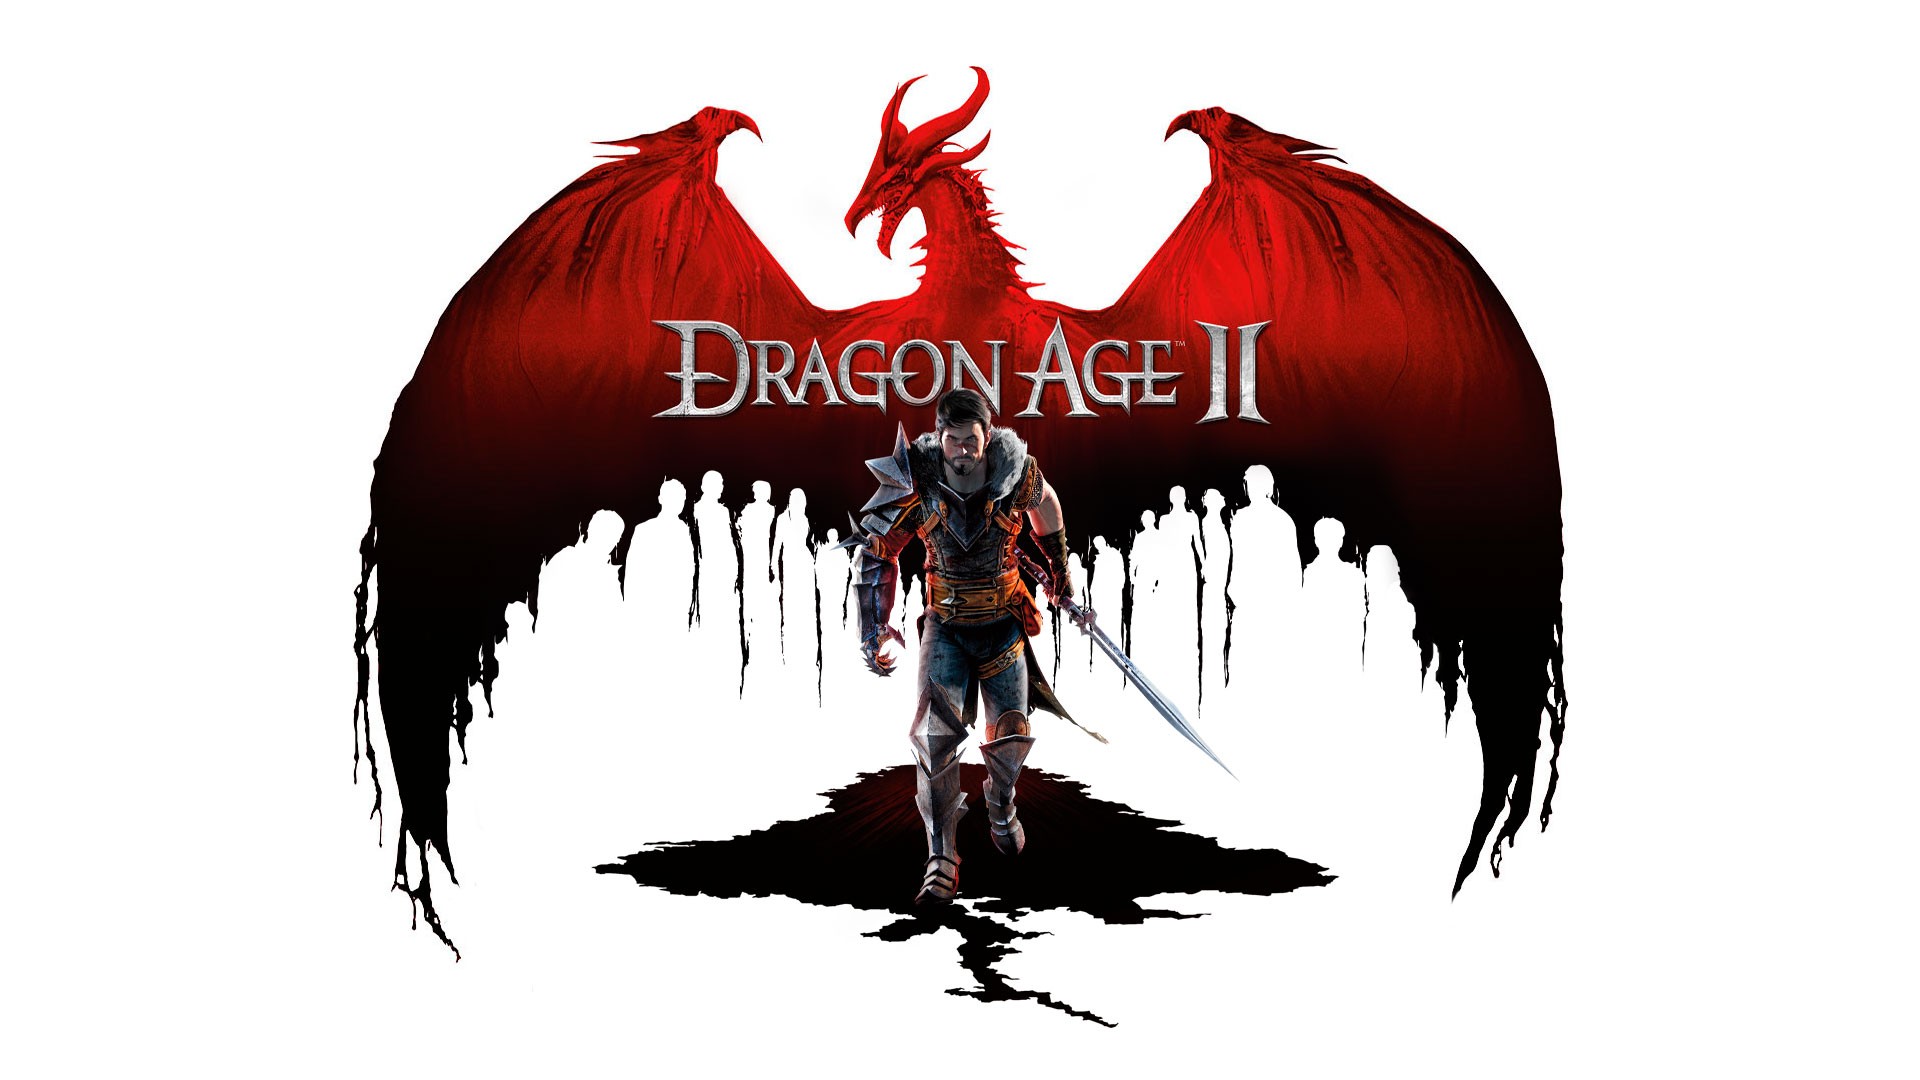 General 1920x1080 Dragon Age II video games PC gaming simple background video game art